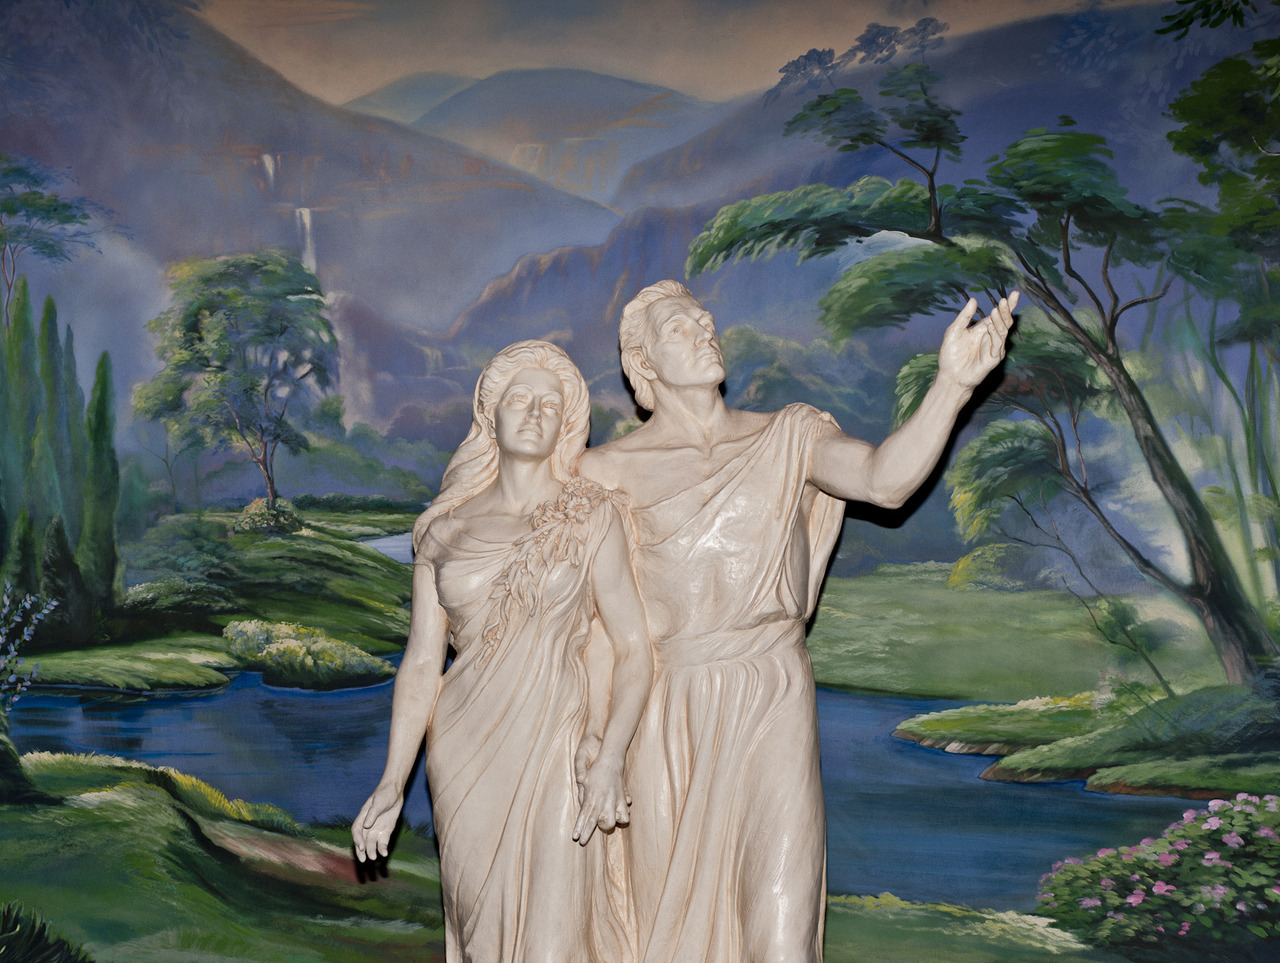  Adam and Eve in the visitor center of the Salt Lake City, LDS Temple. Shot for Stern